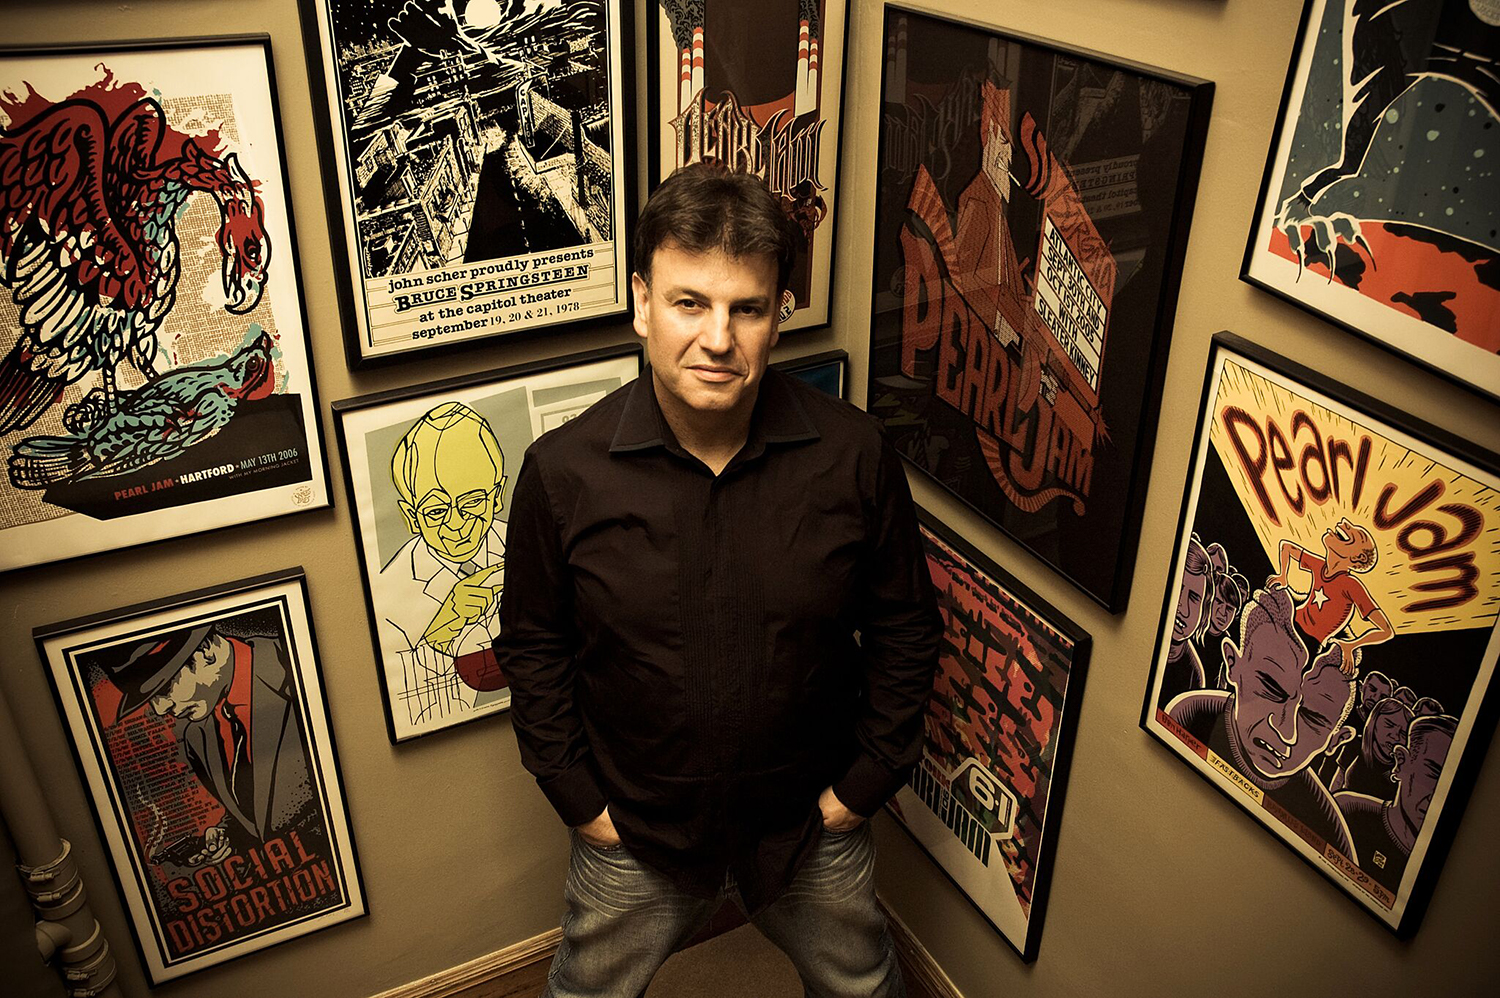 DJ Rich Russo in front of his collection of concert posters